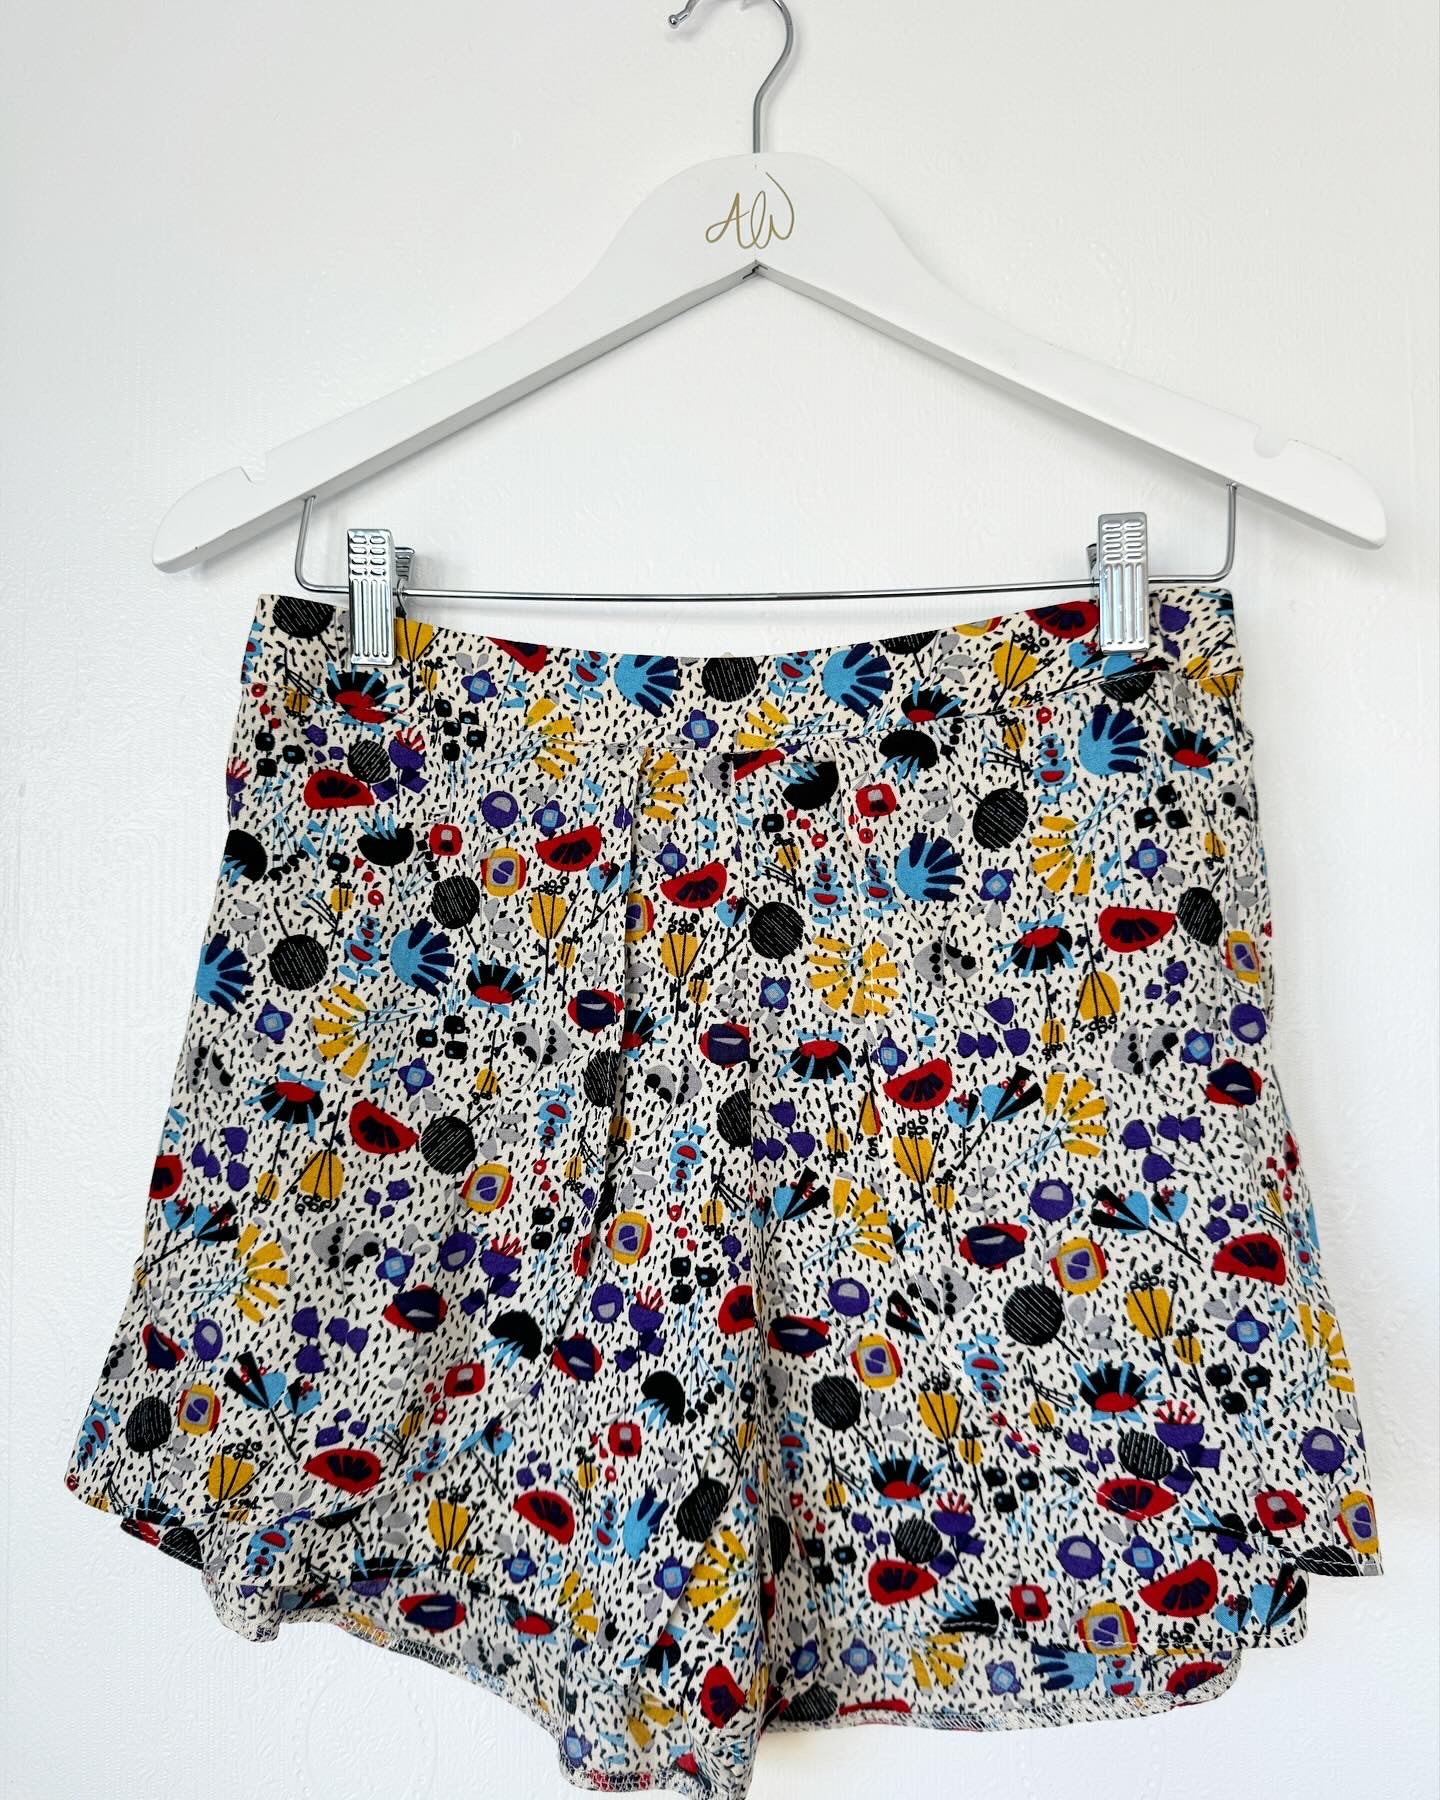 Eclectic Shorts (Second hand)